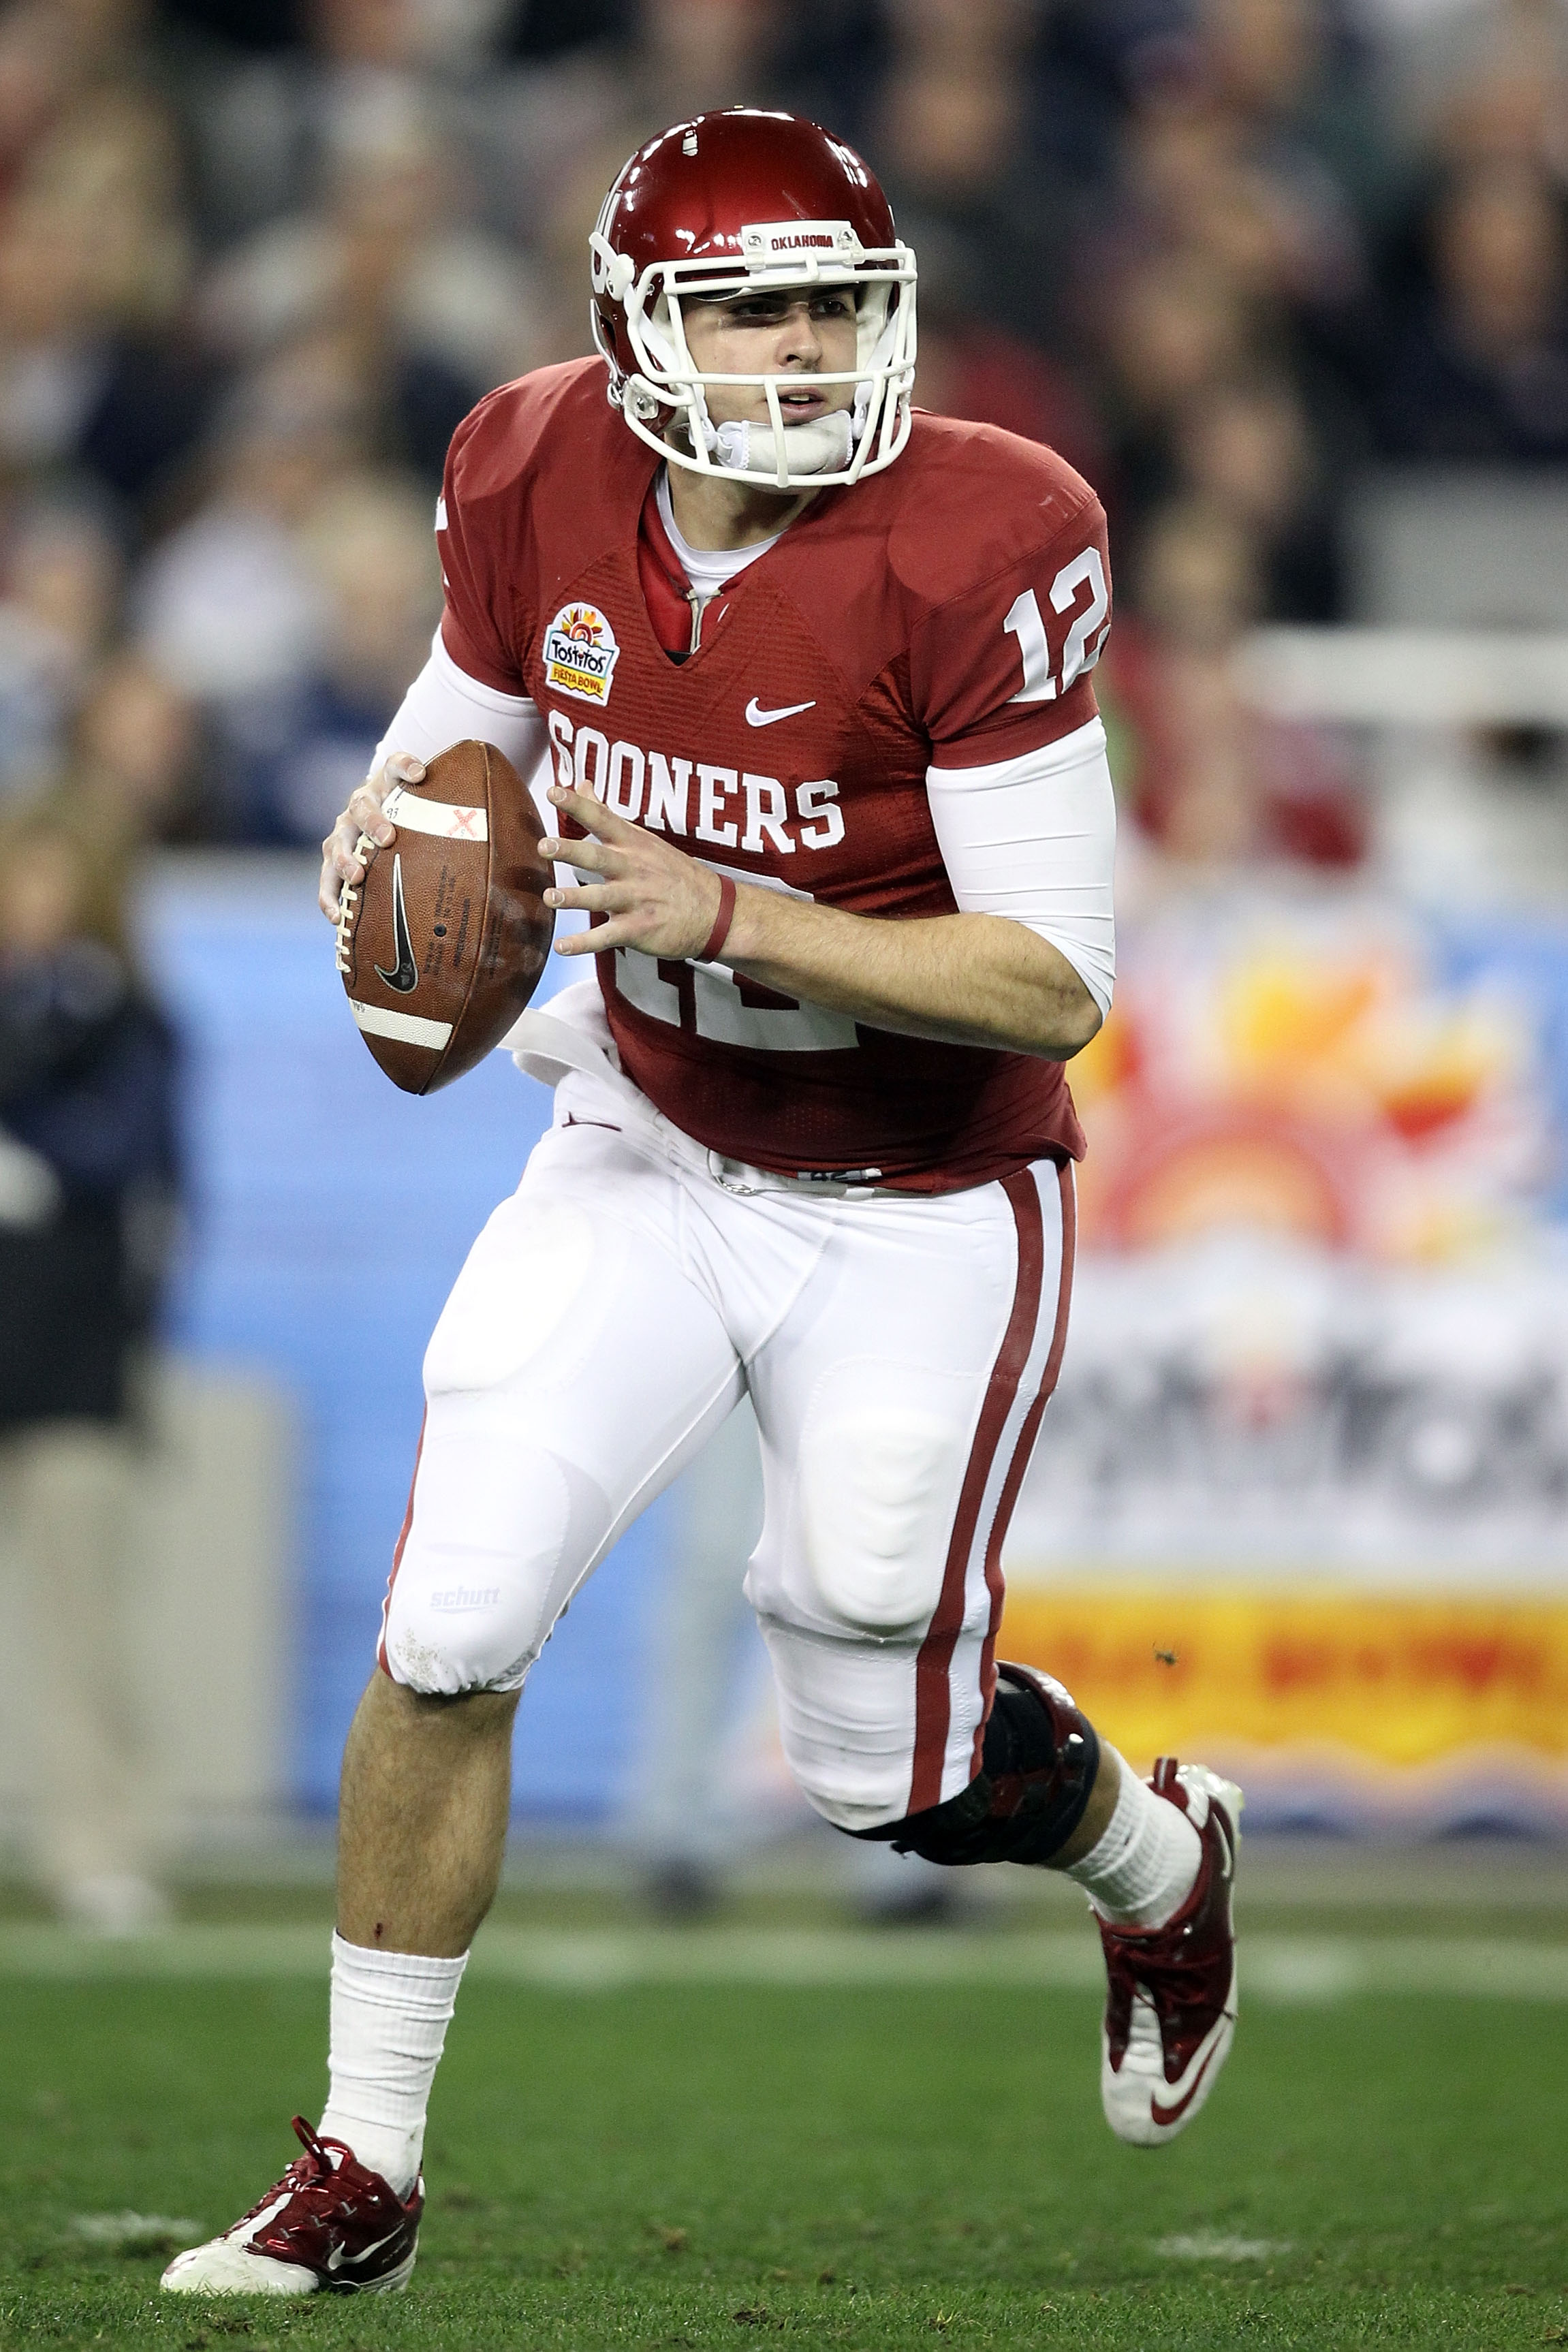 GLENDALE, AZ - JANUARY 01:  Landry Jones #12 of the Oklahoma Sooners throws the ball against the Connecticut Huskies during the Tostitos Fiesta Bowl at the Universtity of Phoenix Stadium on January 1, 2011 in Glendale, Arizona.  (Photo by Christian Peters